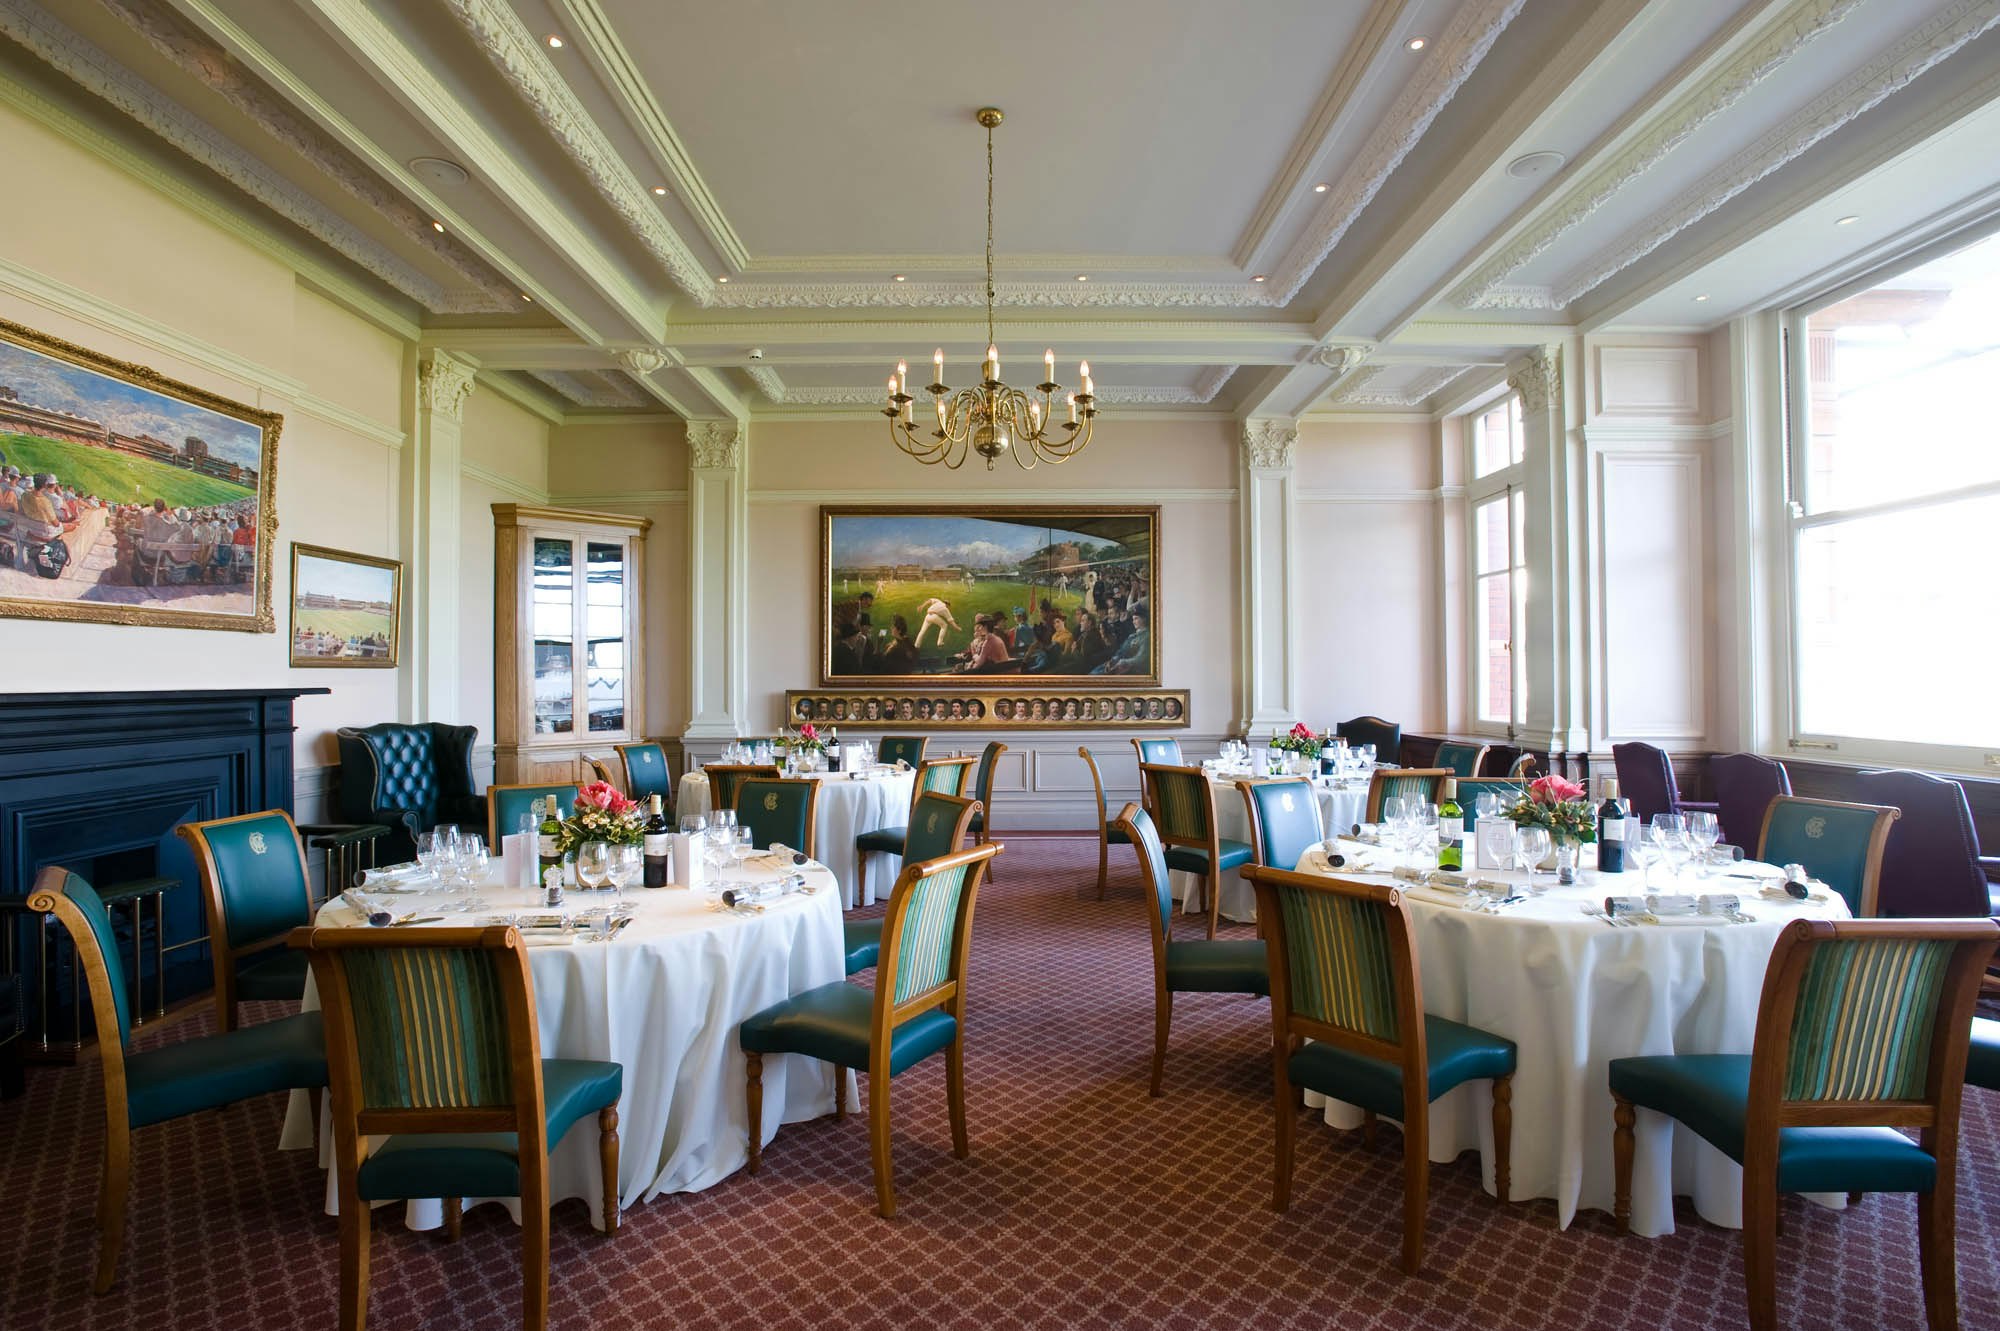 Engagement Party Venues in London - Lord's Cricket Ground